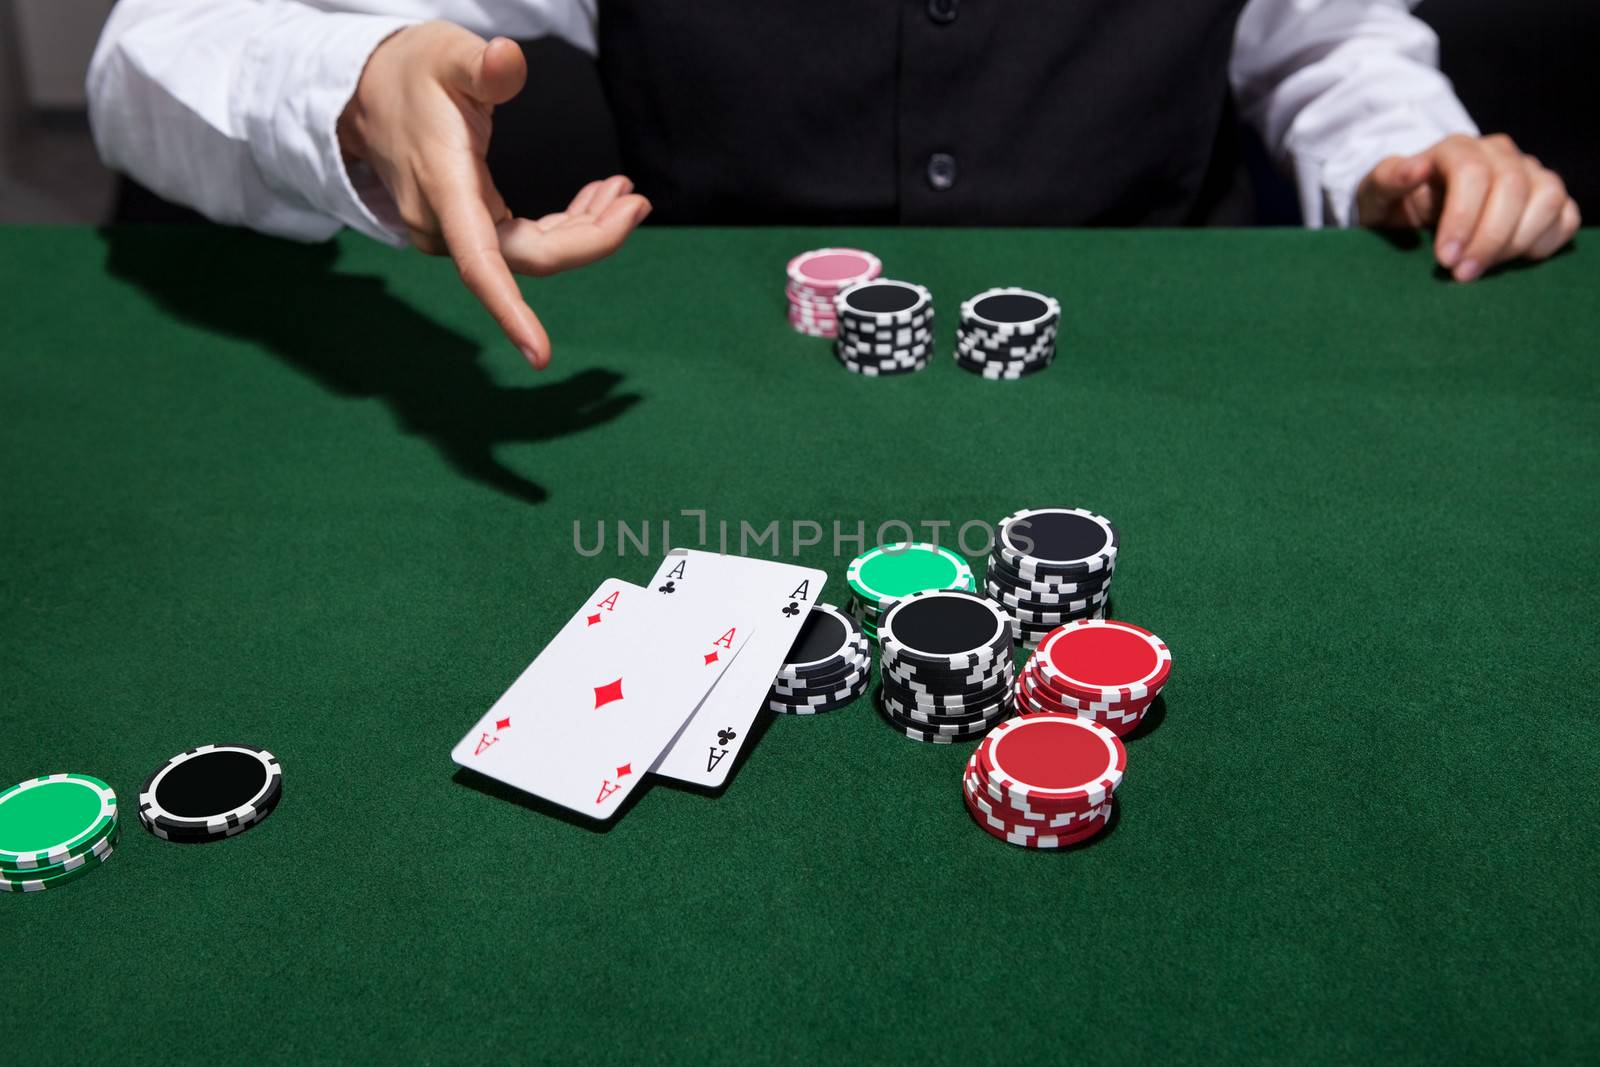 Poker player throwing down a pair of aces as he declares his hand and folds during a game of poker at a casino gaming table